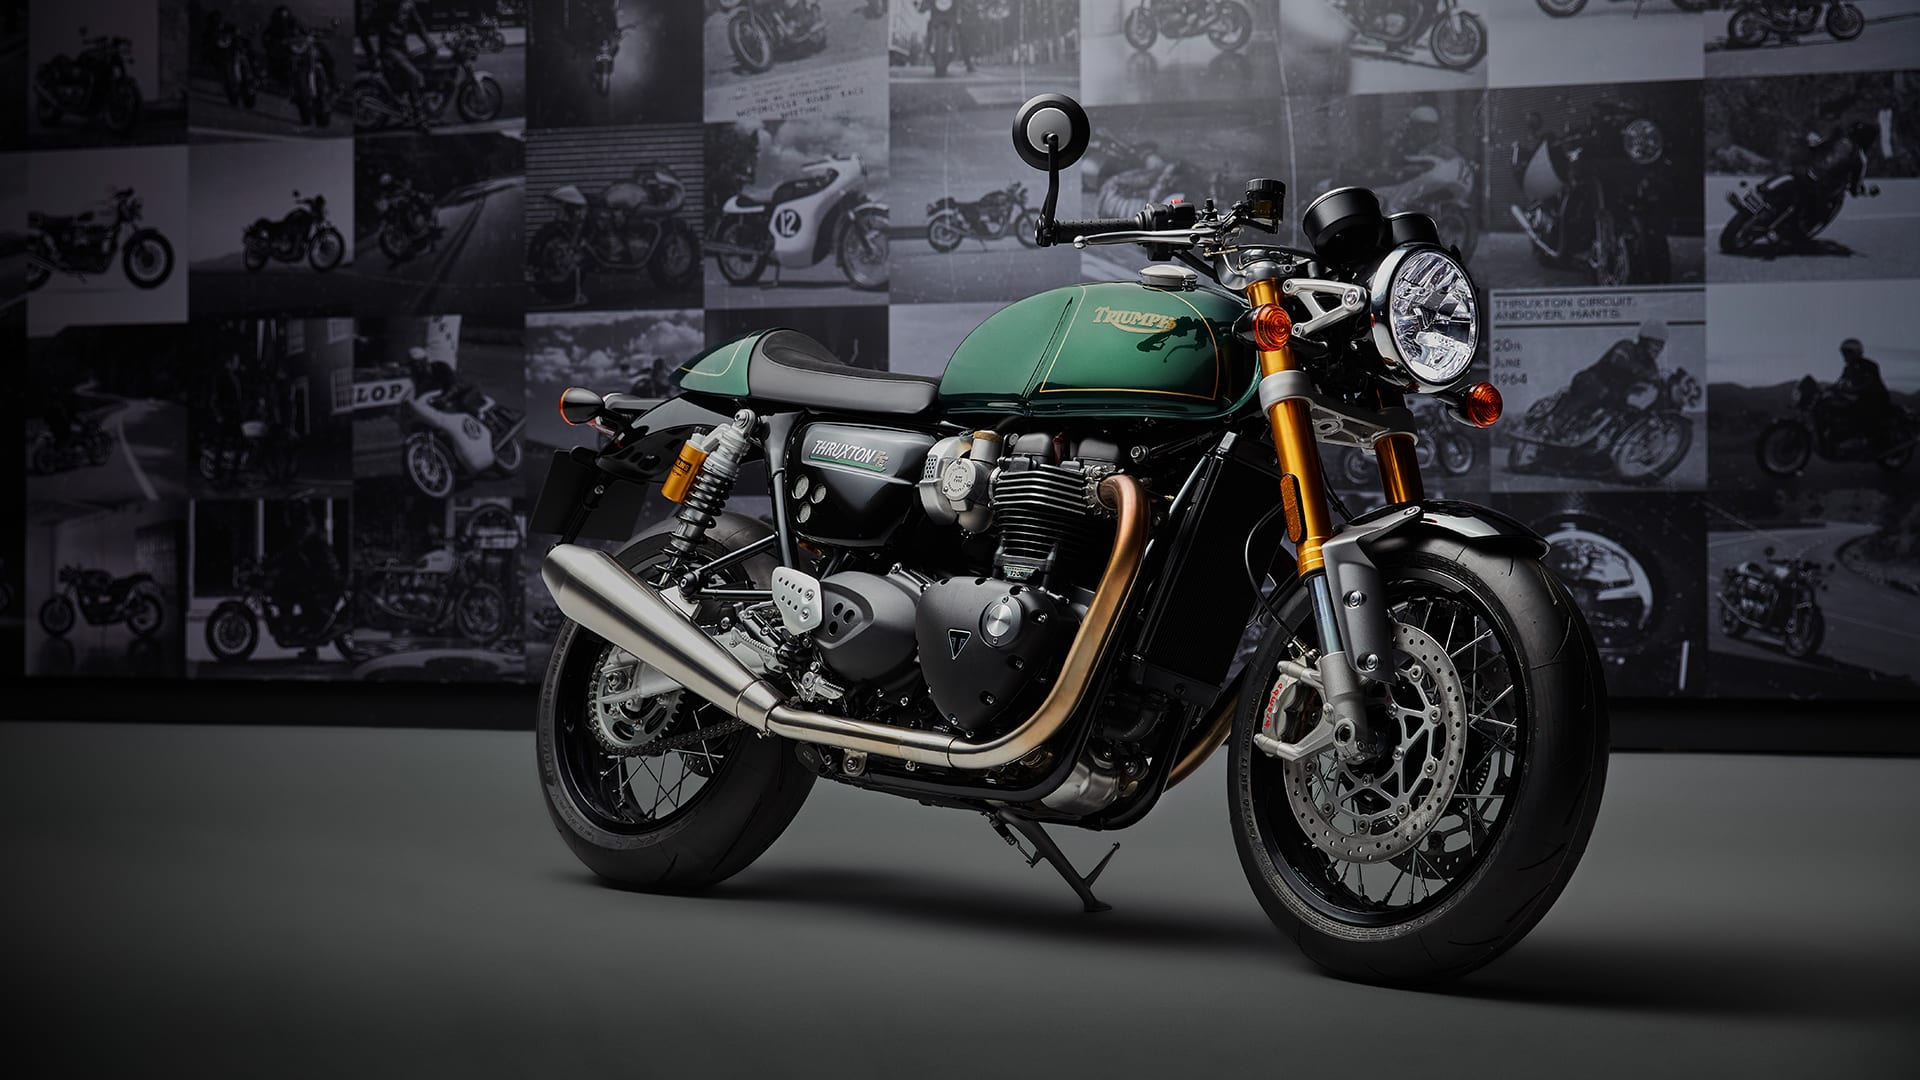 Triumph Thruxton Final Edition with Thruxton archive images in the background)